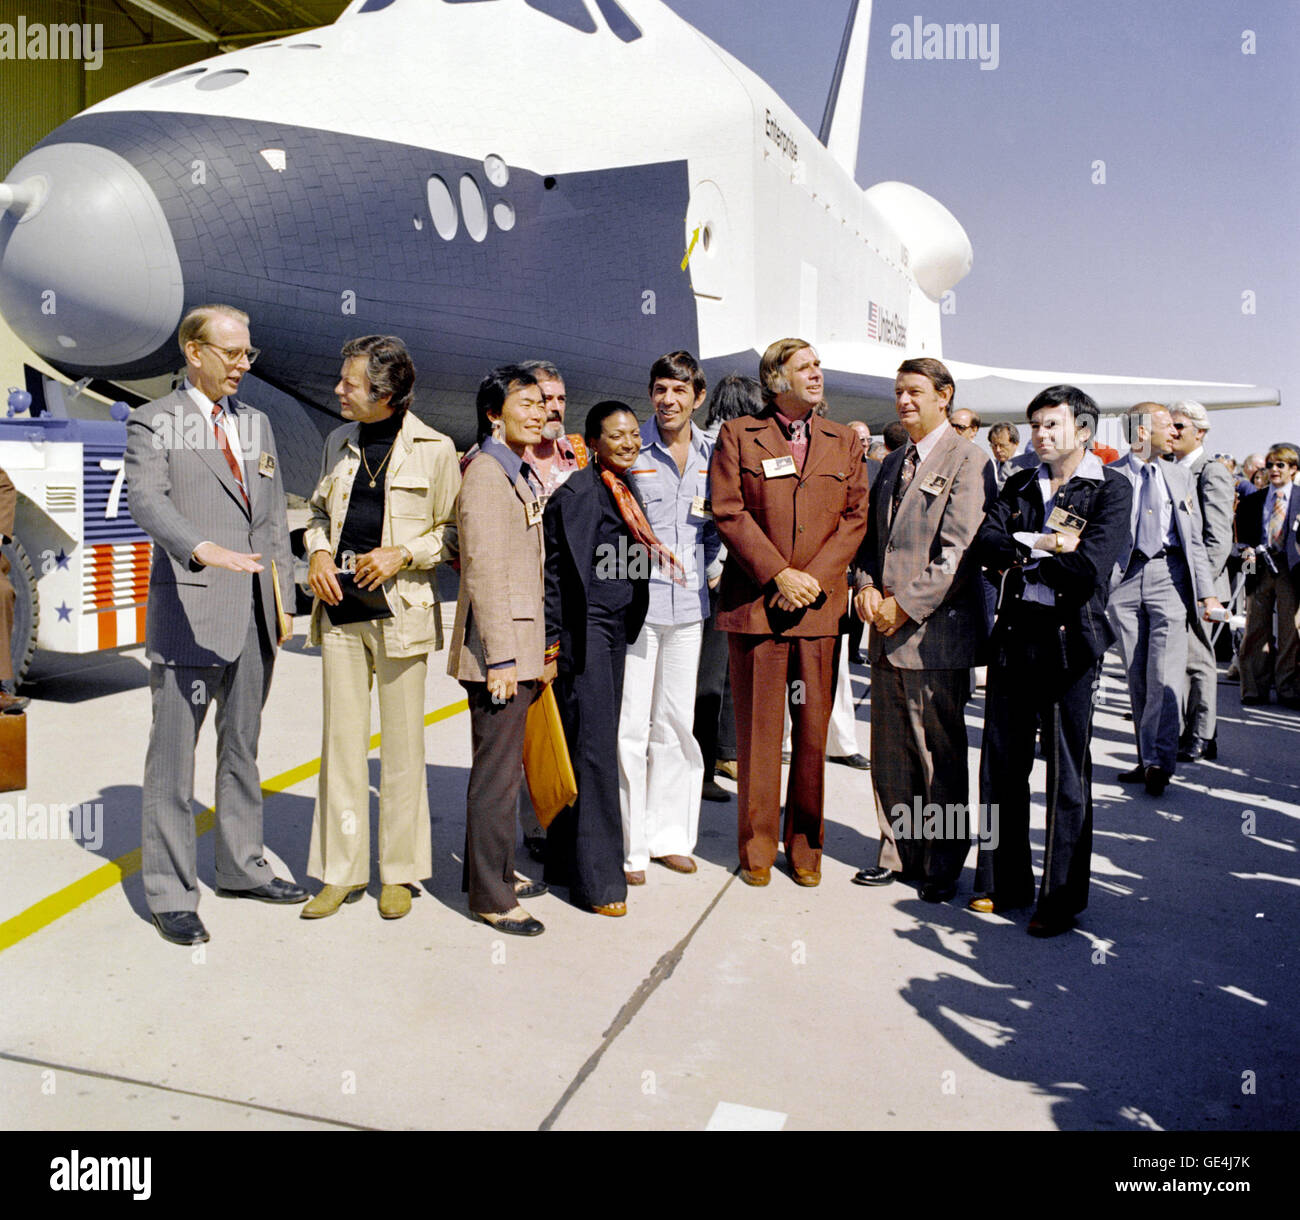 (September 17, 1976) The Shuttle Enterprise rolls out of the Palmdale manufacturing facilities with Star Trek television cast members. From left to right they are: Dr. James D. Fletcher, NASA Administrator, DeForest Kelley (Dr. &quot;Bones&quot; McCoy), George Takei (Mr. Sulu), James Doohan (Mr. Scott), Nichelle Nichols (Lt. Uhura), Leonard Nimoy (the indefatigable Mr. Spock), Gene Rodenberry (The Great Bird of the Galaxy), and Walter Koenig (Ensign Pavel Chekov).   Image # : S91-27436 Stock Photo